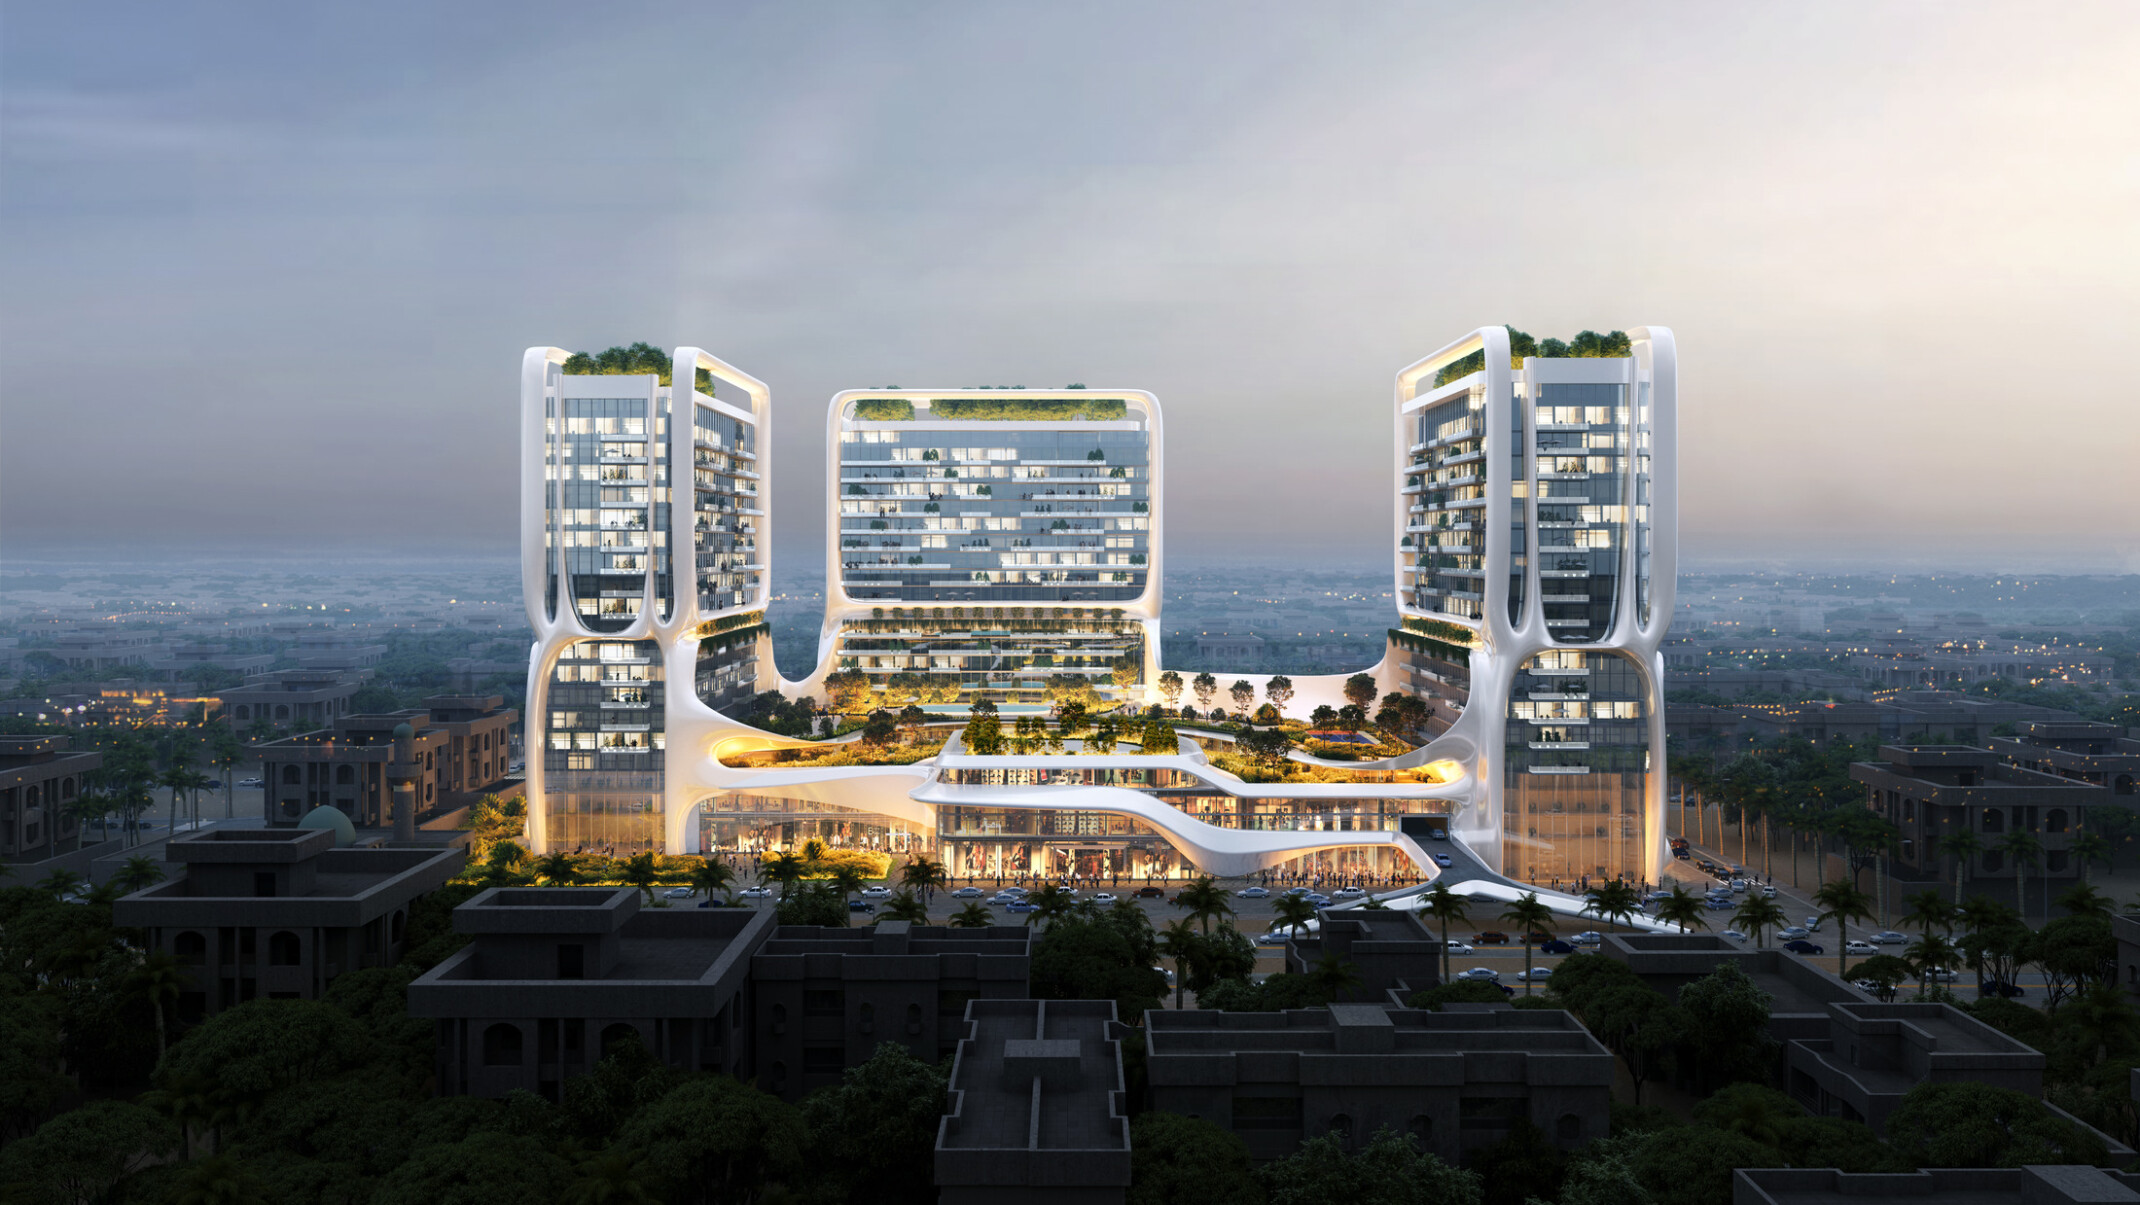 Architectural rendering of a modern three tower residential complex with interconnecting bridges, featuring illuminated facades against a twilight sky.